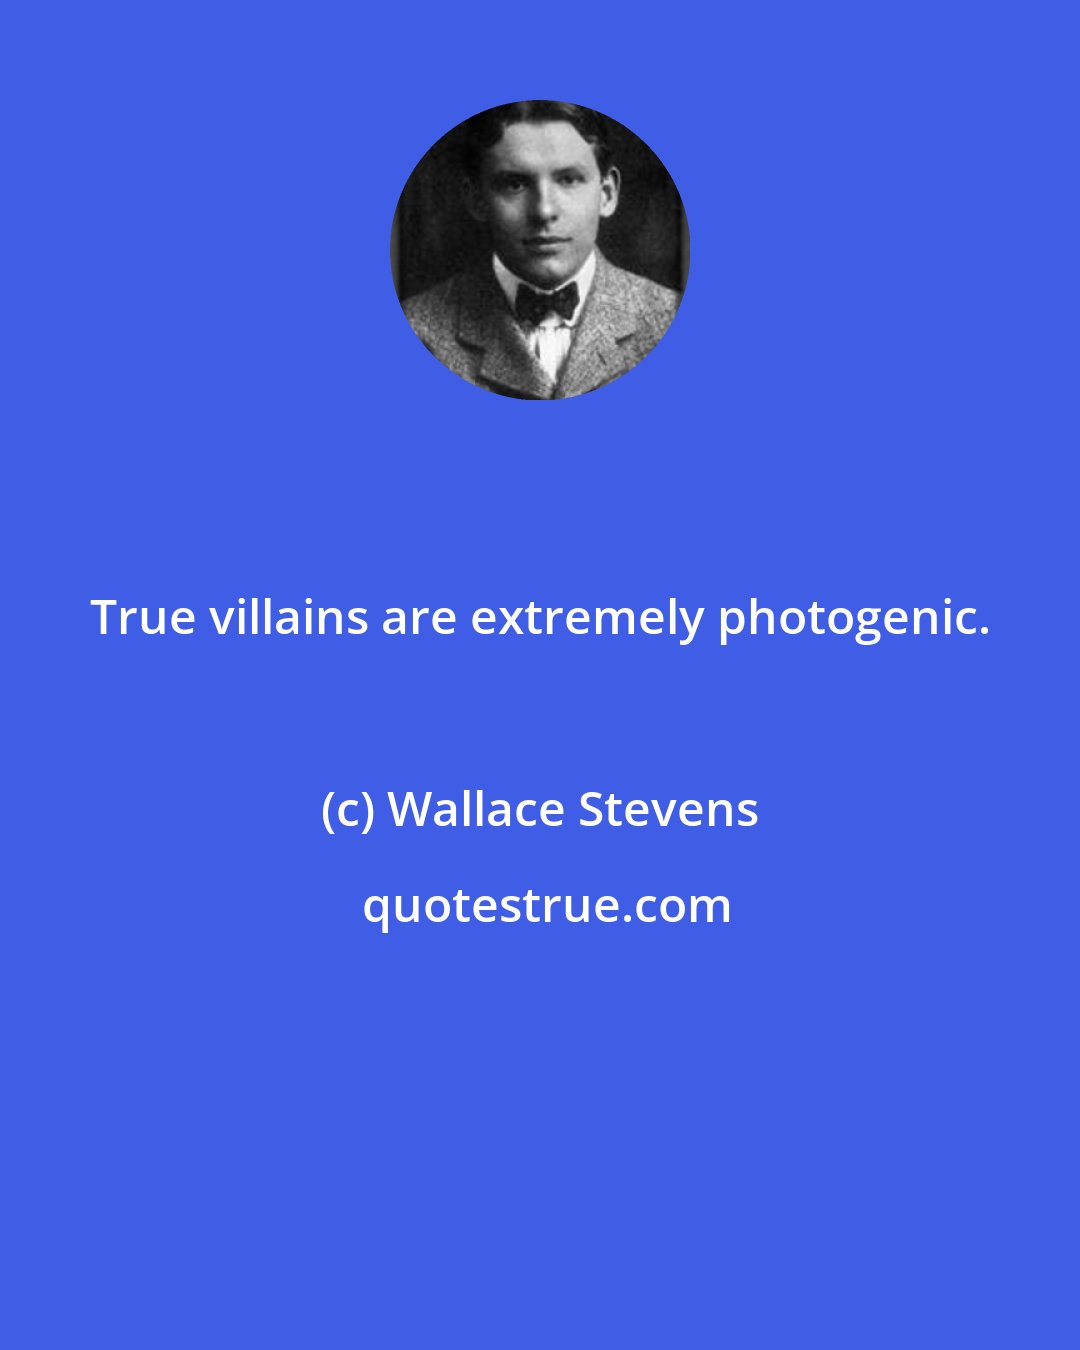 Wallace Stevens: True villains are extremely photogenic.